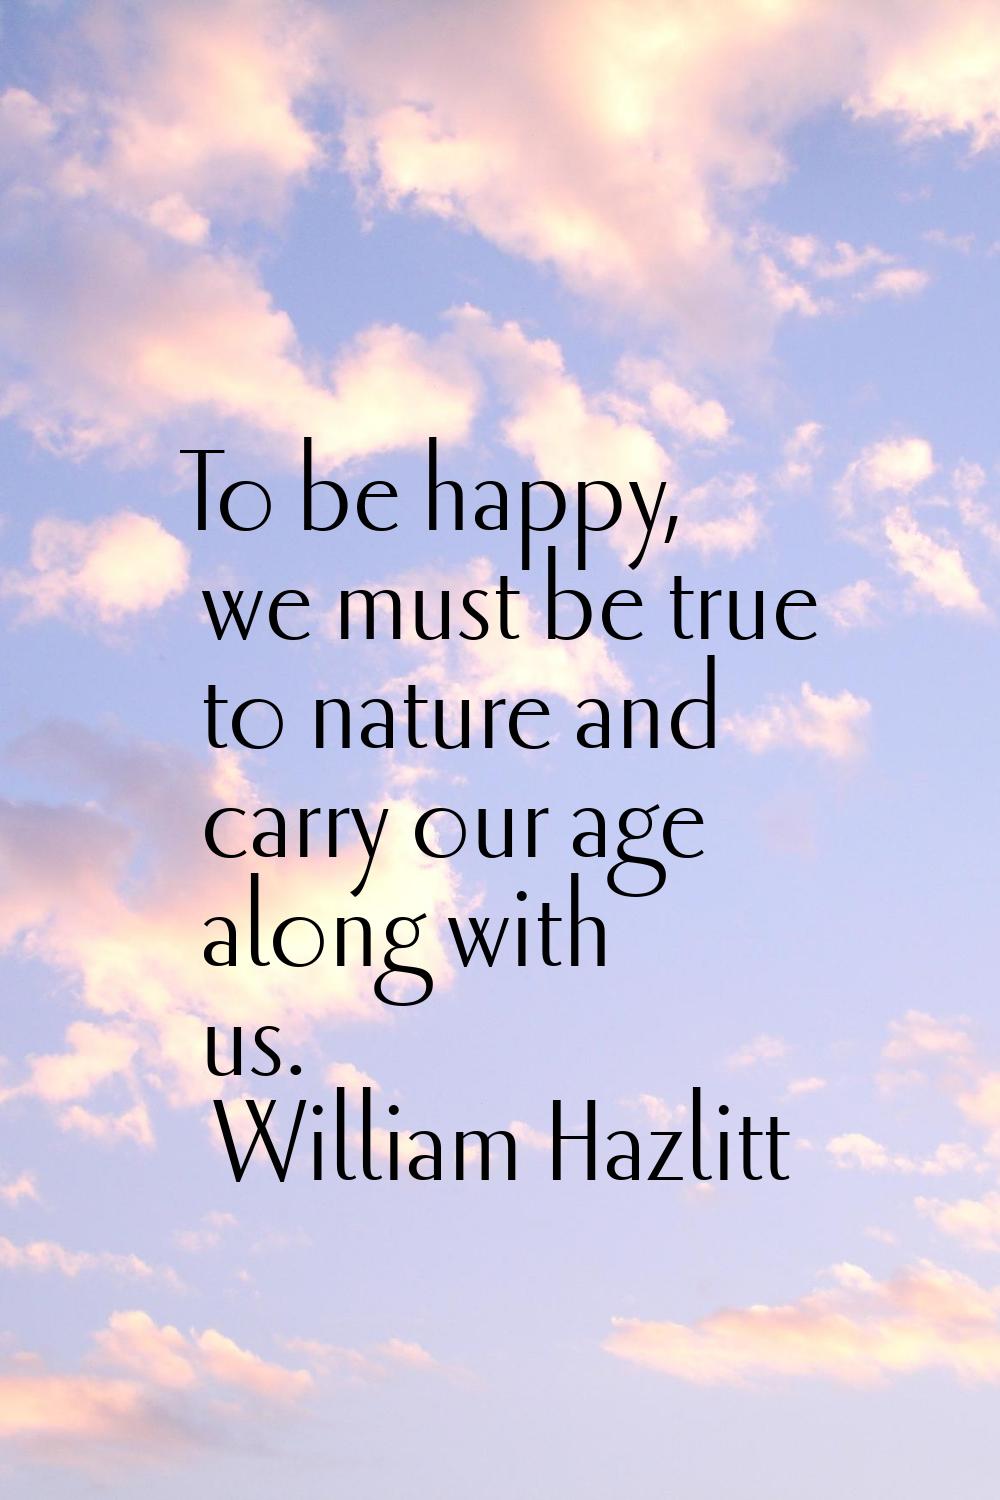 To be happy, we must be true to nature and carry our age along with us.